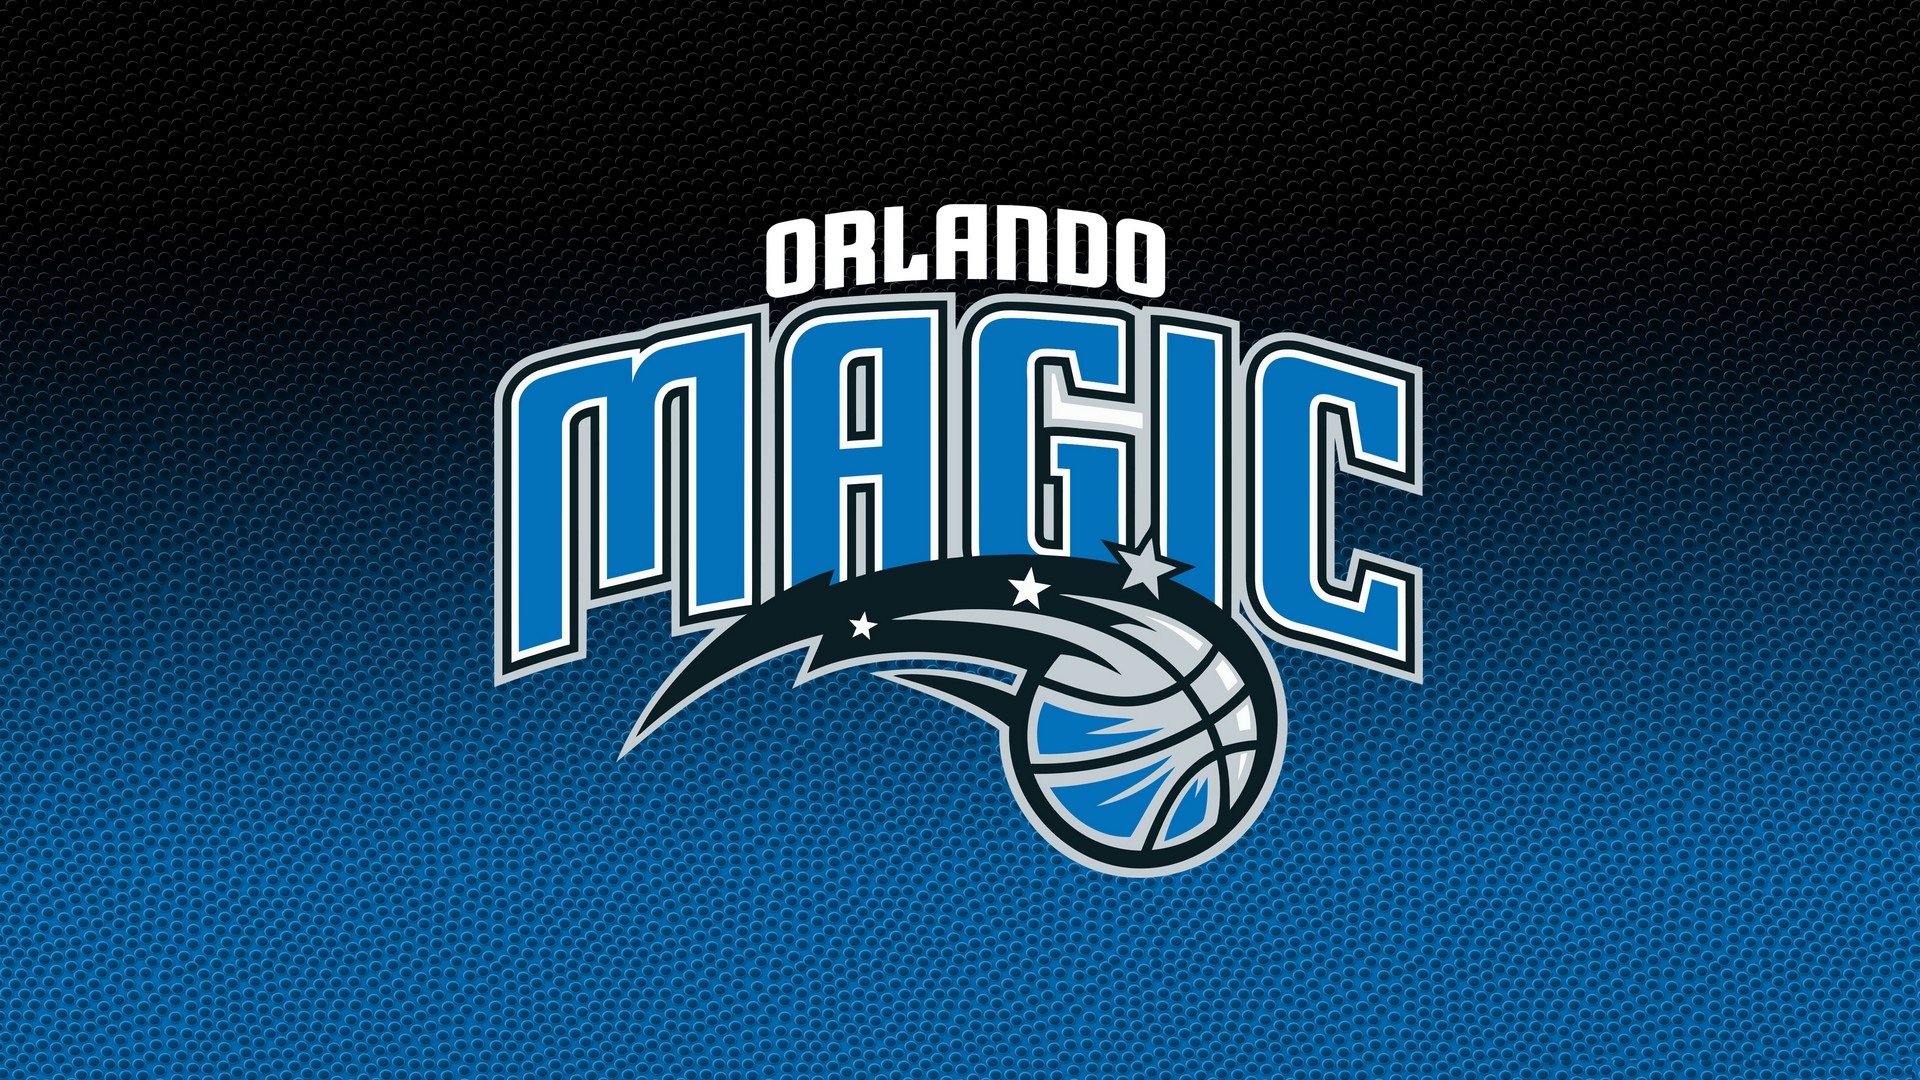 Orlando Magic HD Wallpapers with high-resolution 1920x1080 pixel. You can use this wallpaper for your Desktop Computer Backgrounds, Windows or Mac Screensavers, iPhone Lock screen, Tablet or Android and another Mobile Phone device